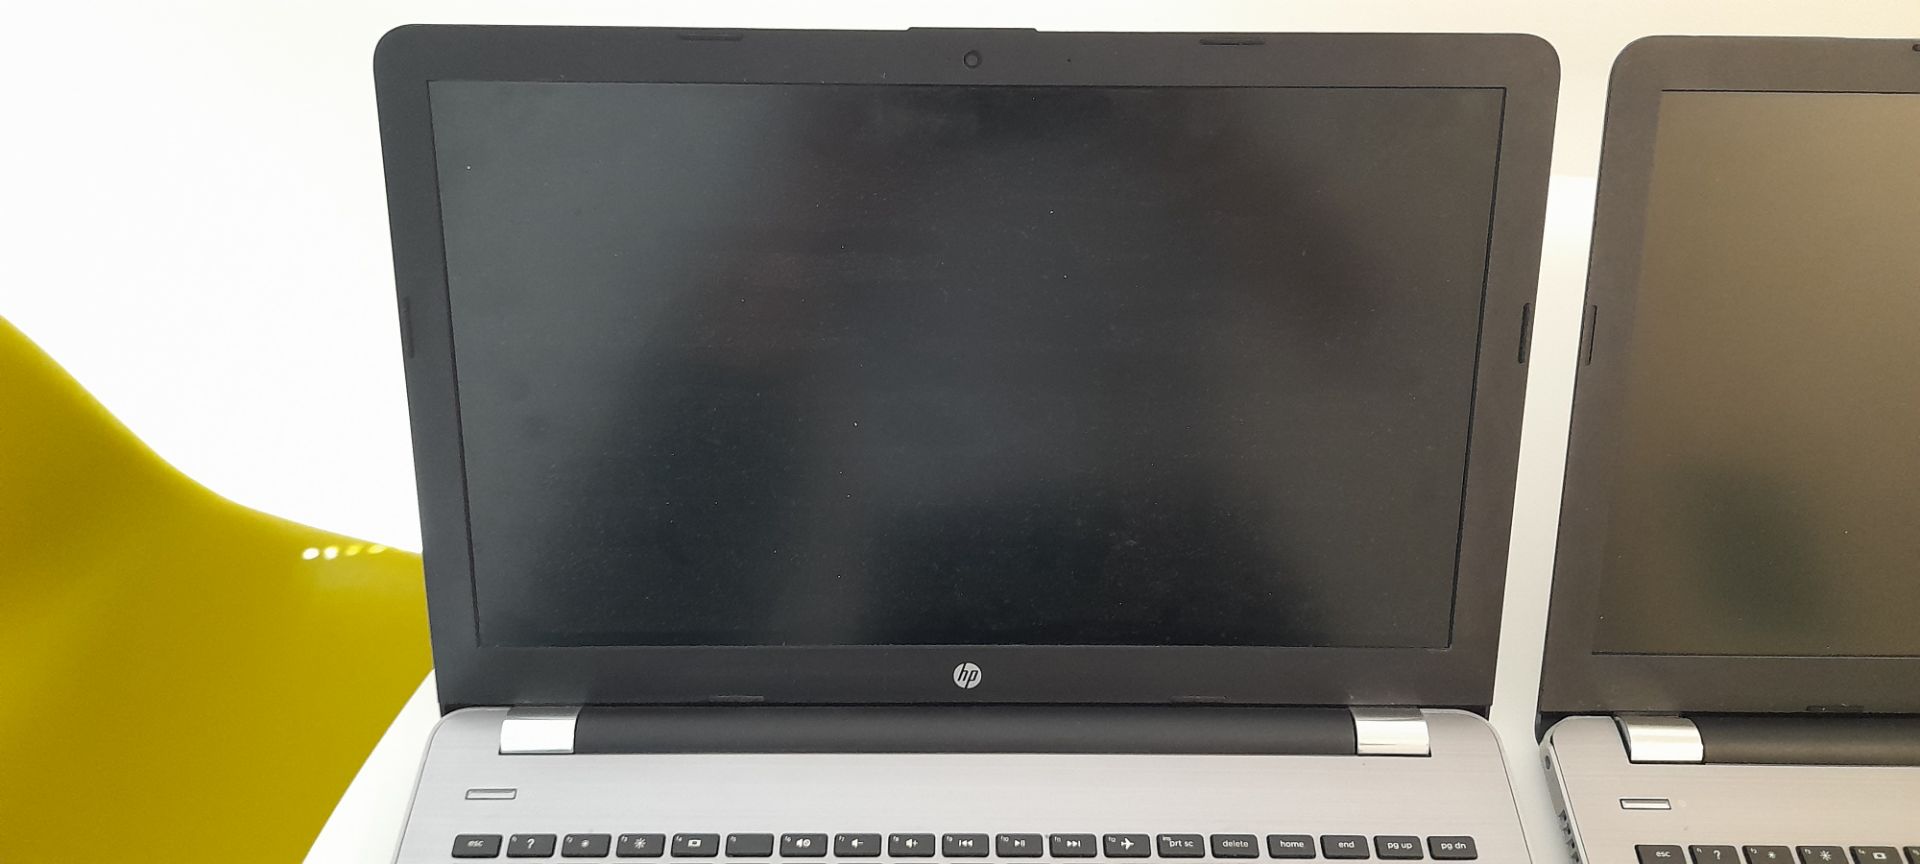 2x HP 3168NGW laptop with intel core i7, 7th Gen. Collection from Canary Wharf, London, E14 - Image 5 of 12